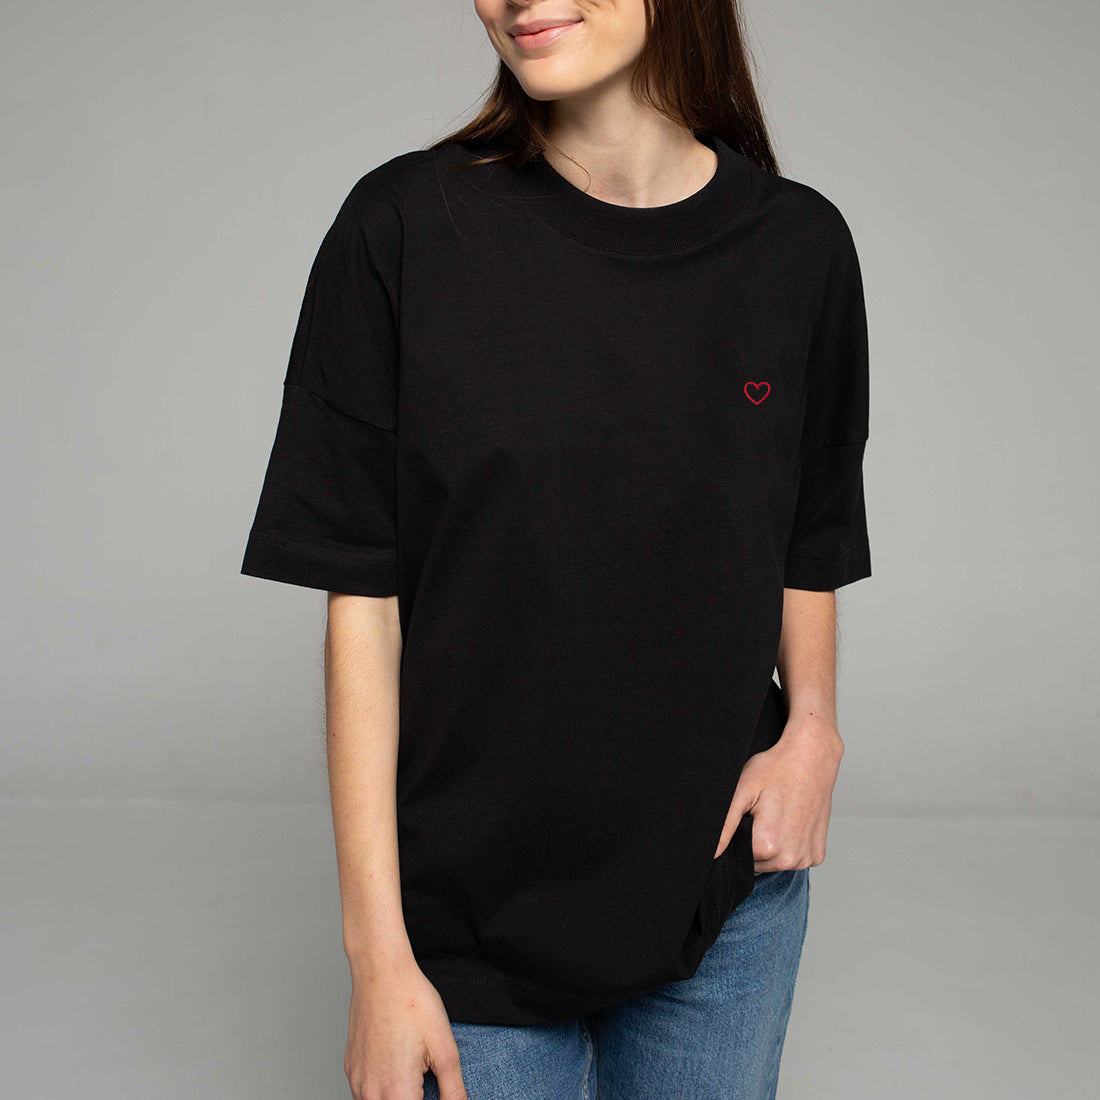 Oversized Black T-Shirt. Silhouetted Heart